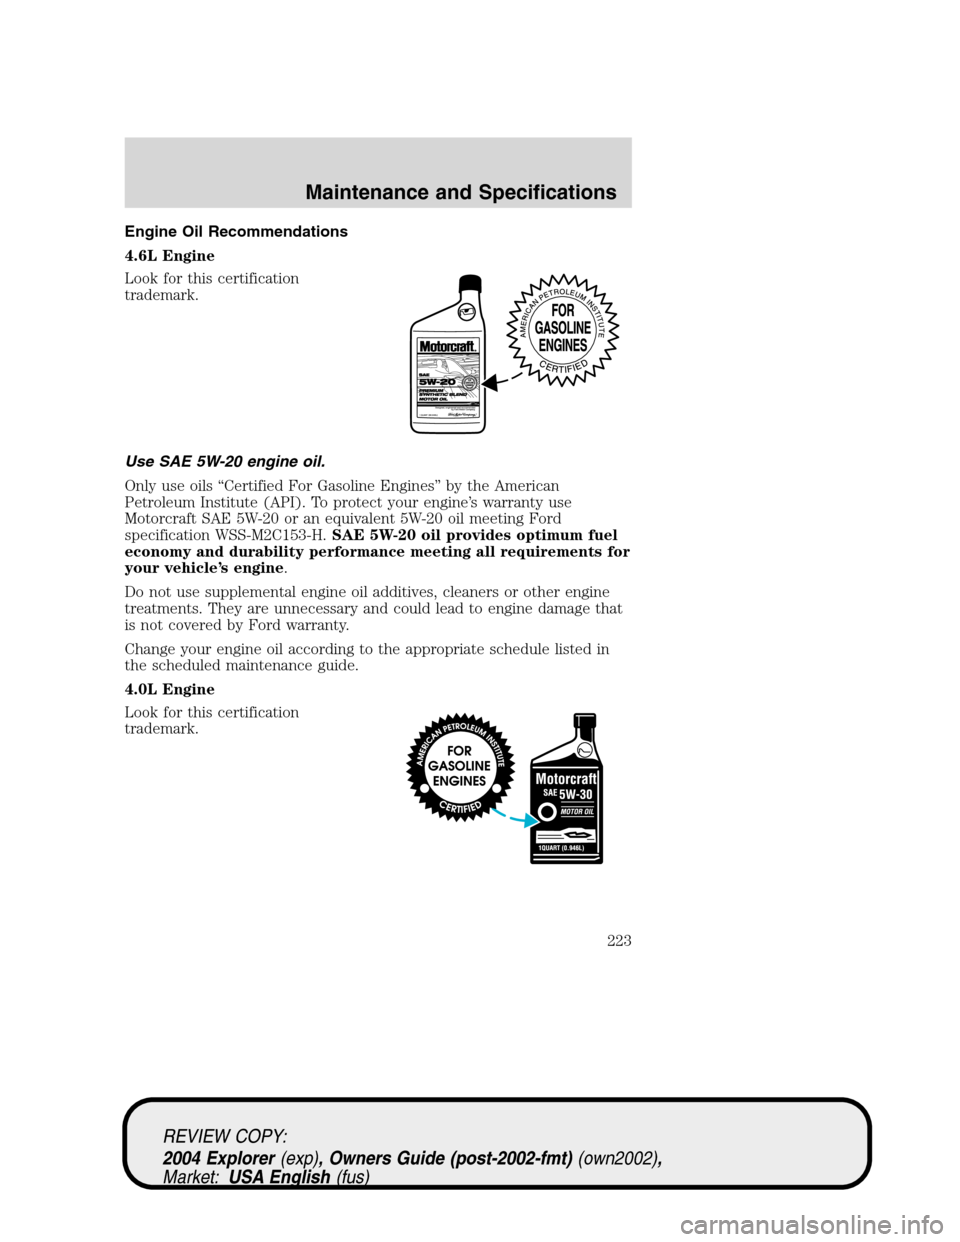 Mercury Mountaineer 2004  s Owners Guide Engine Oil Recommendations
4.6L Engine
Look for this certification
trademark.
Use SAE 5W-20 engine oil.
Only use oils “Certified For Gasoline Engines” by the American
Petroleum Institute (API). To